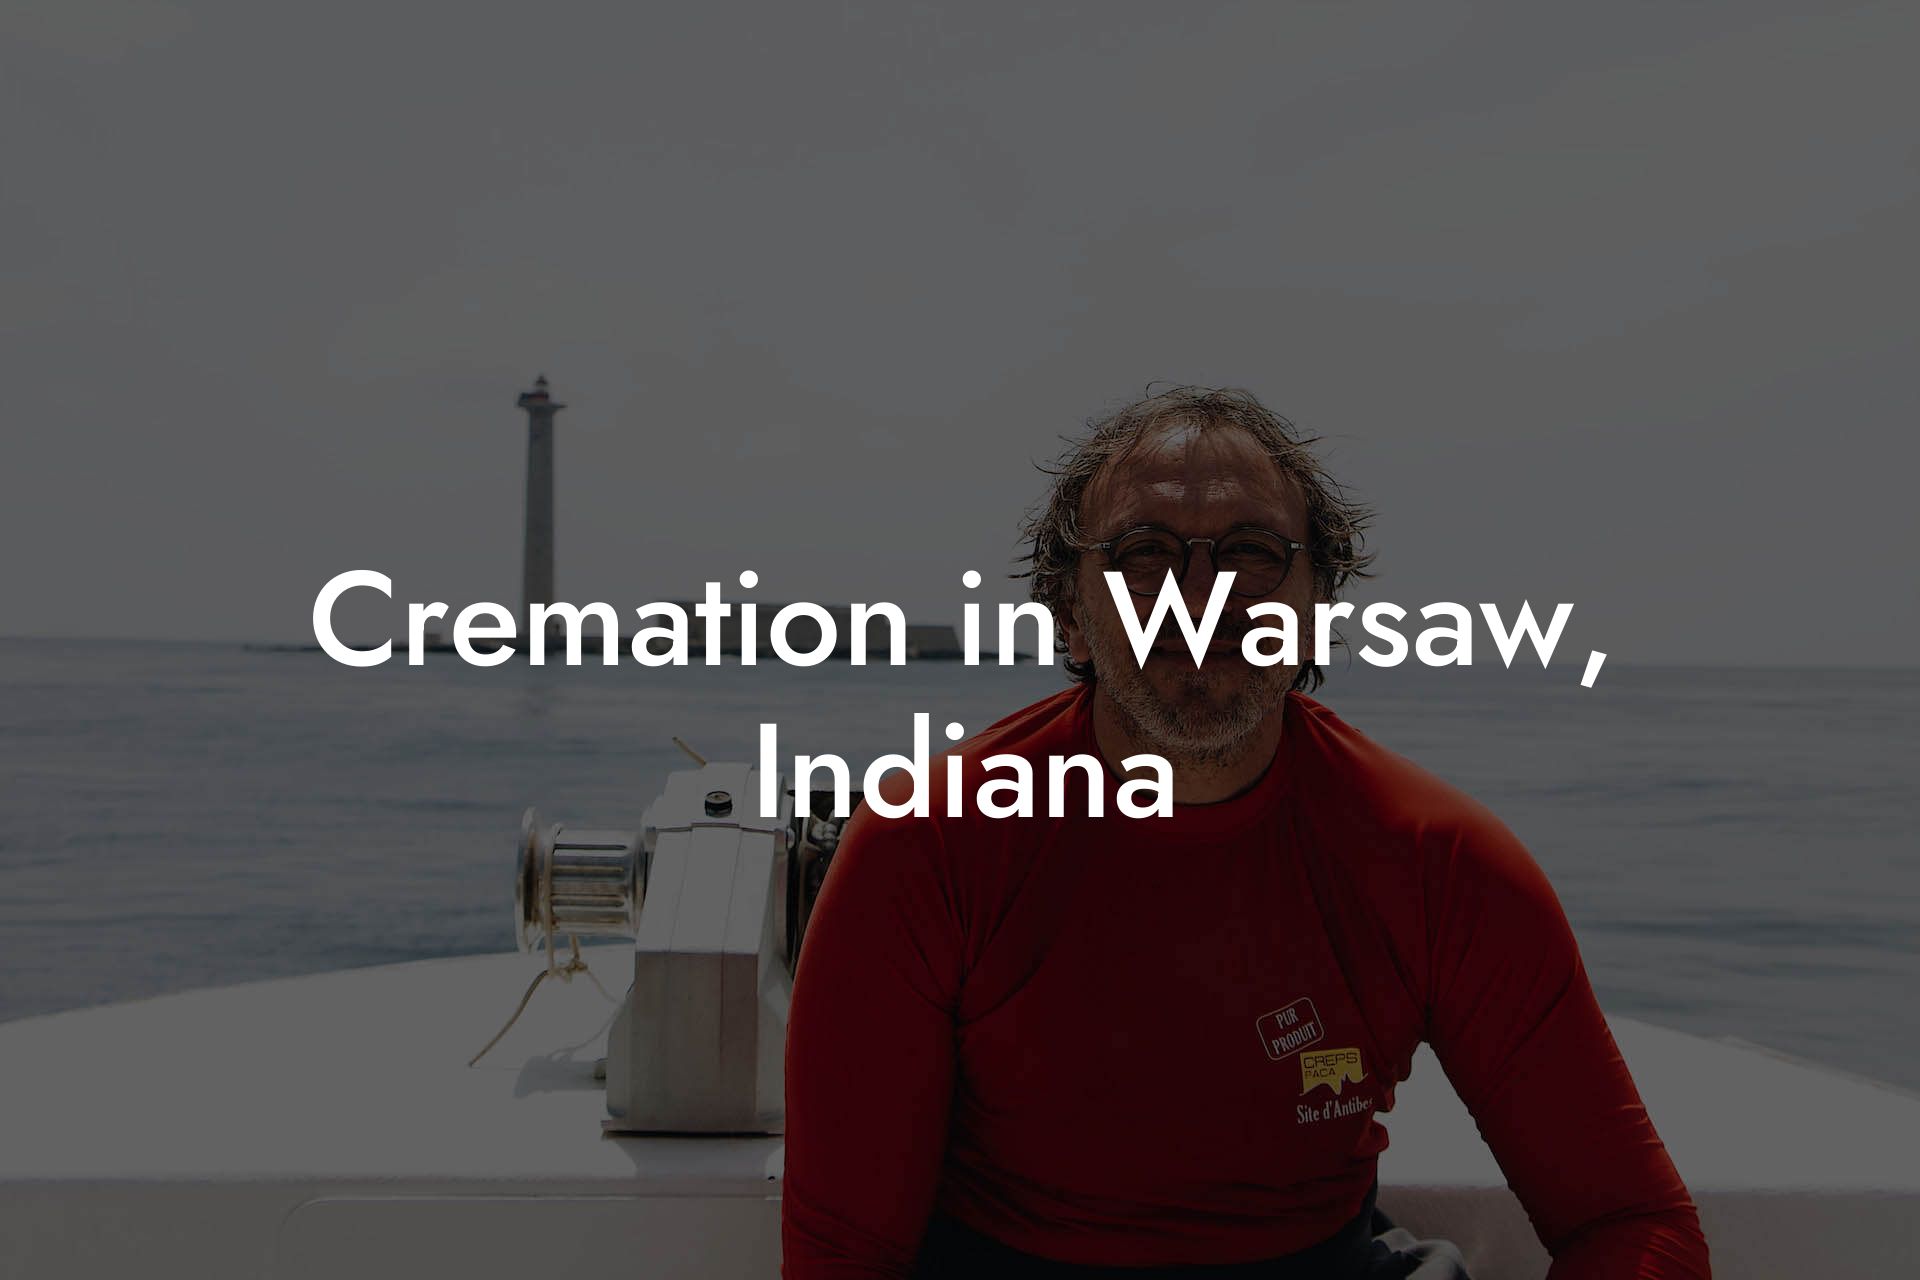 Cremation in Warsaw, Indiana